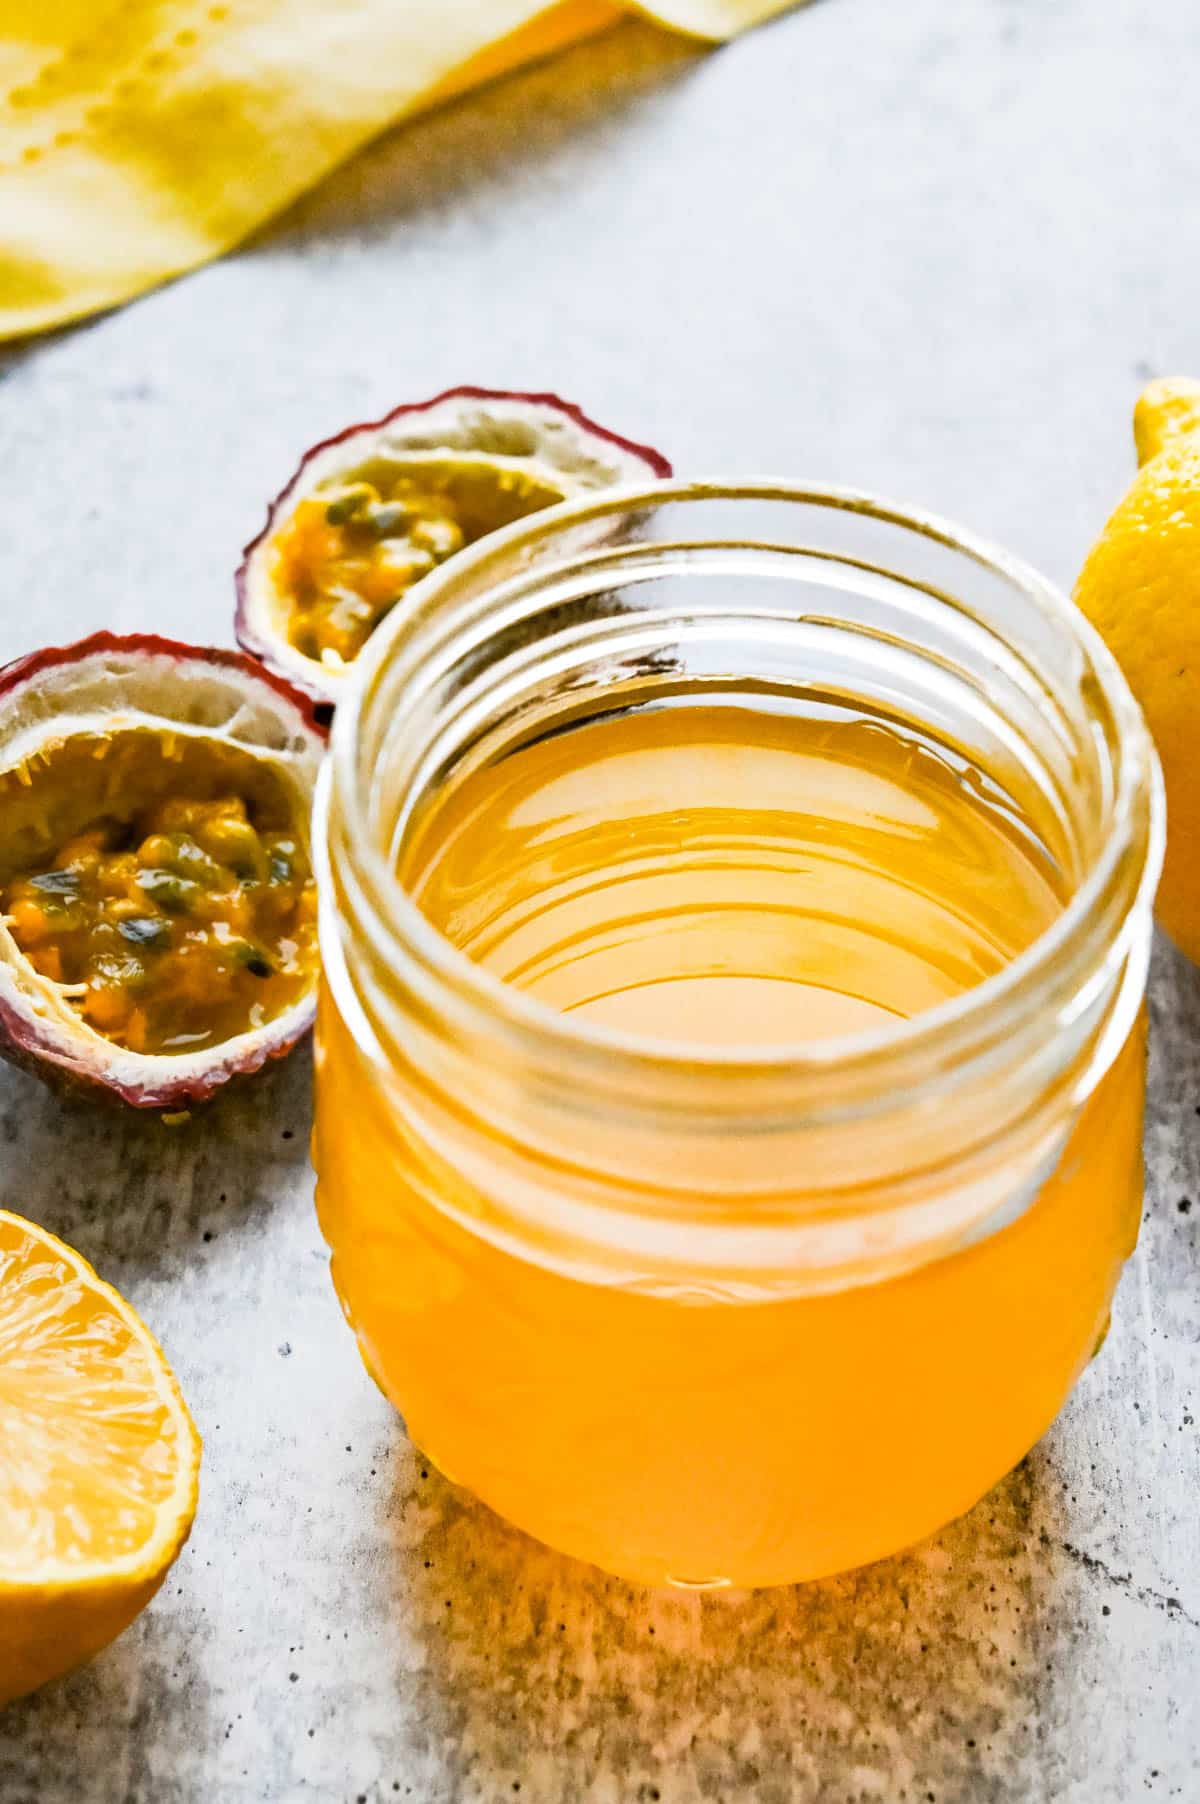 Passion fruit simple syrup in a glass jar.